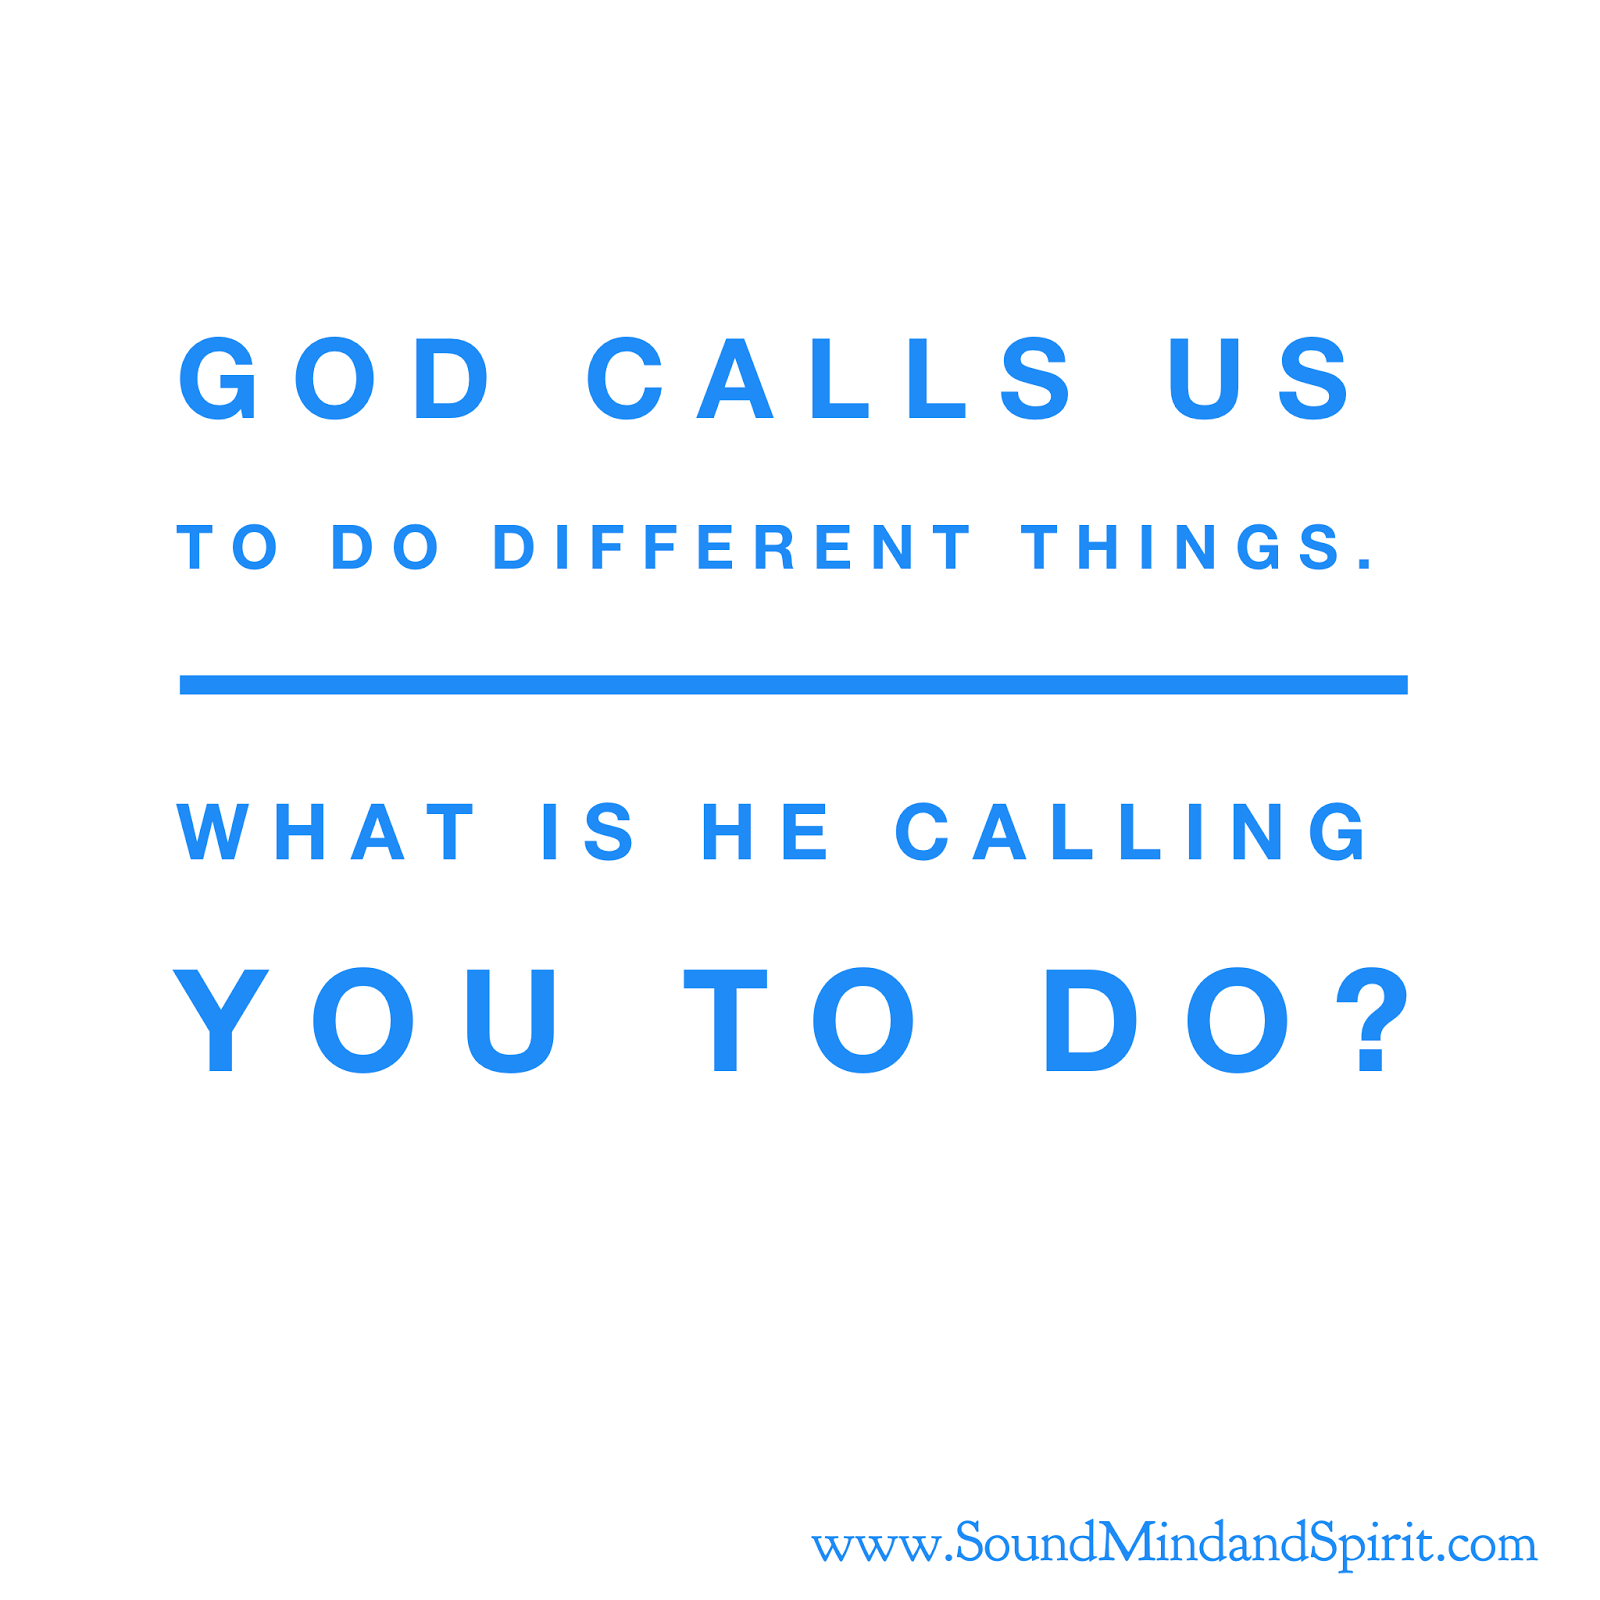 God is calling us to do different things.  What is he calling you to do?